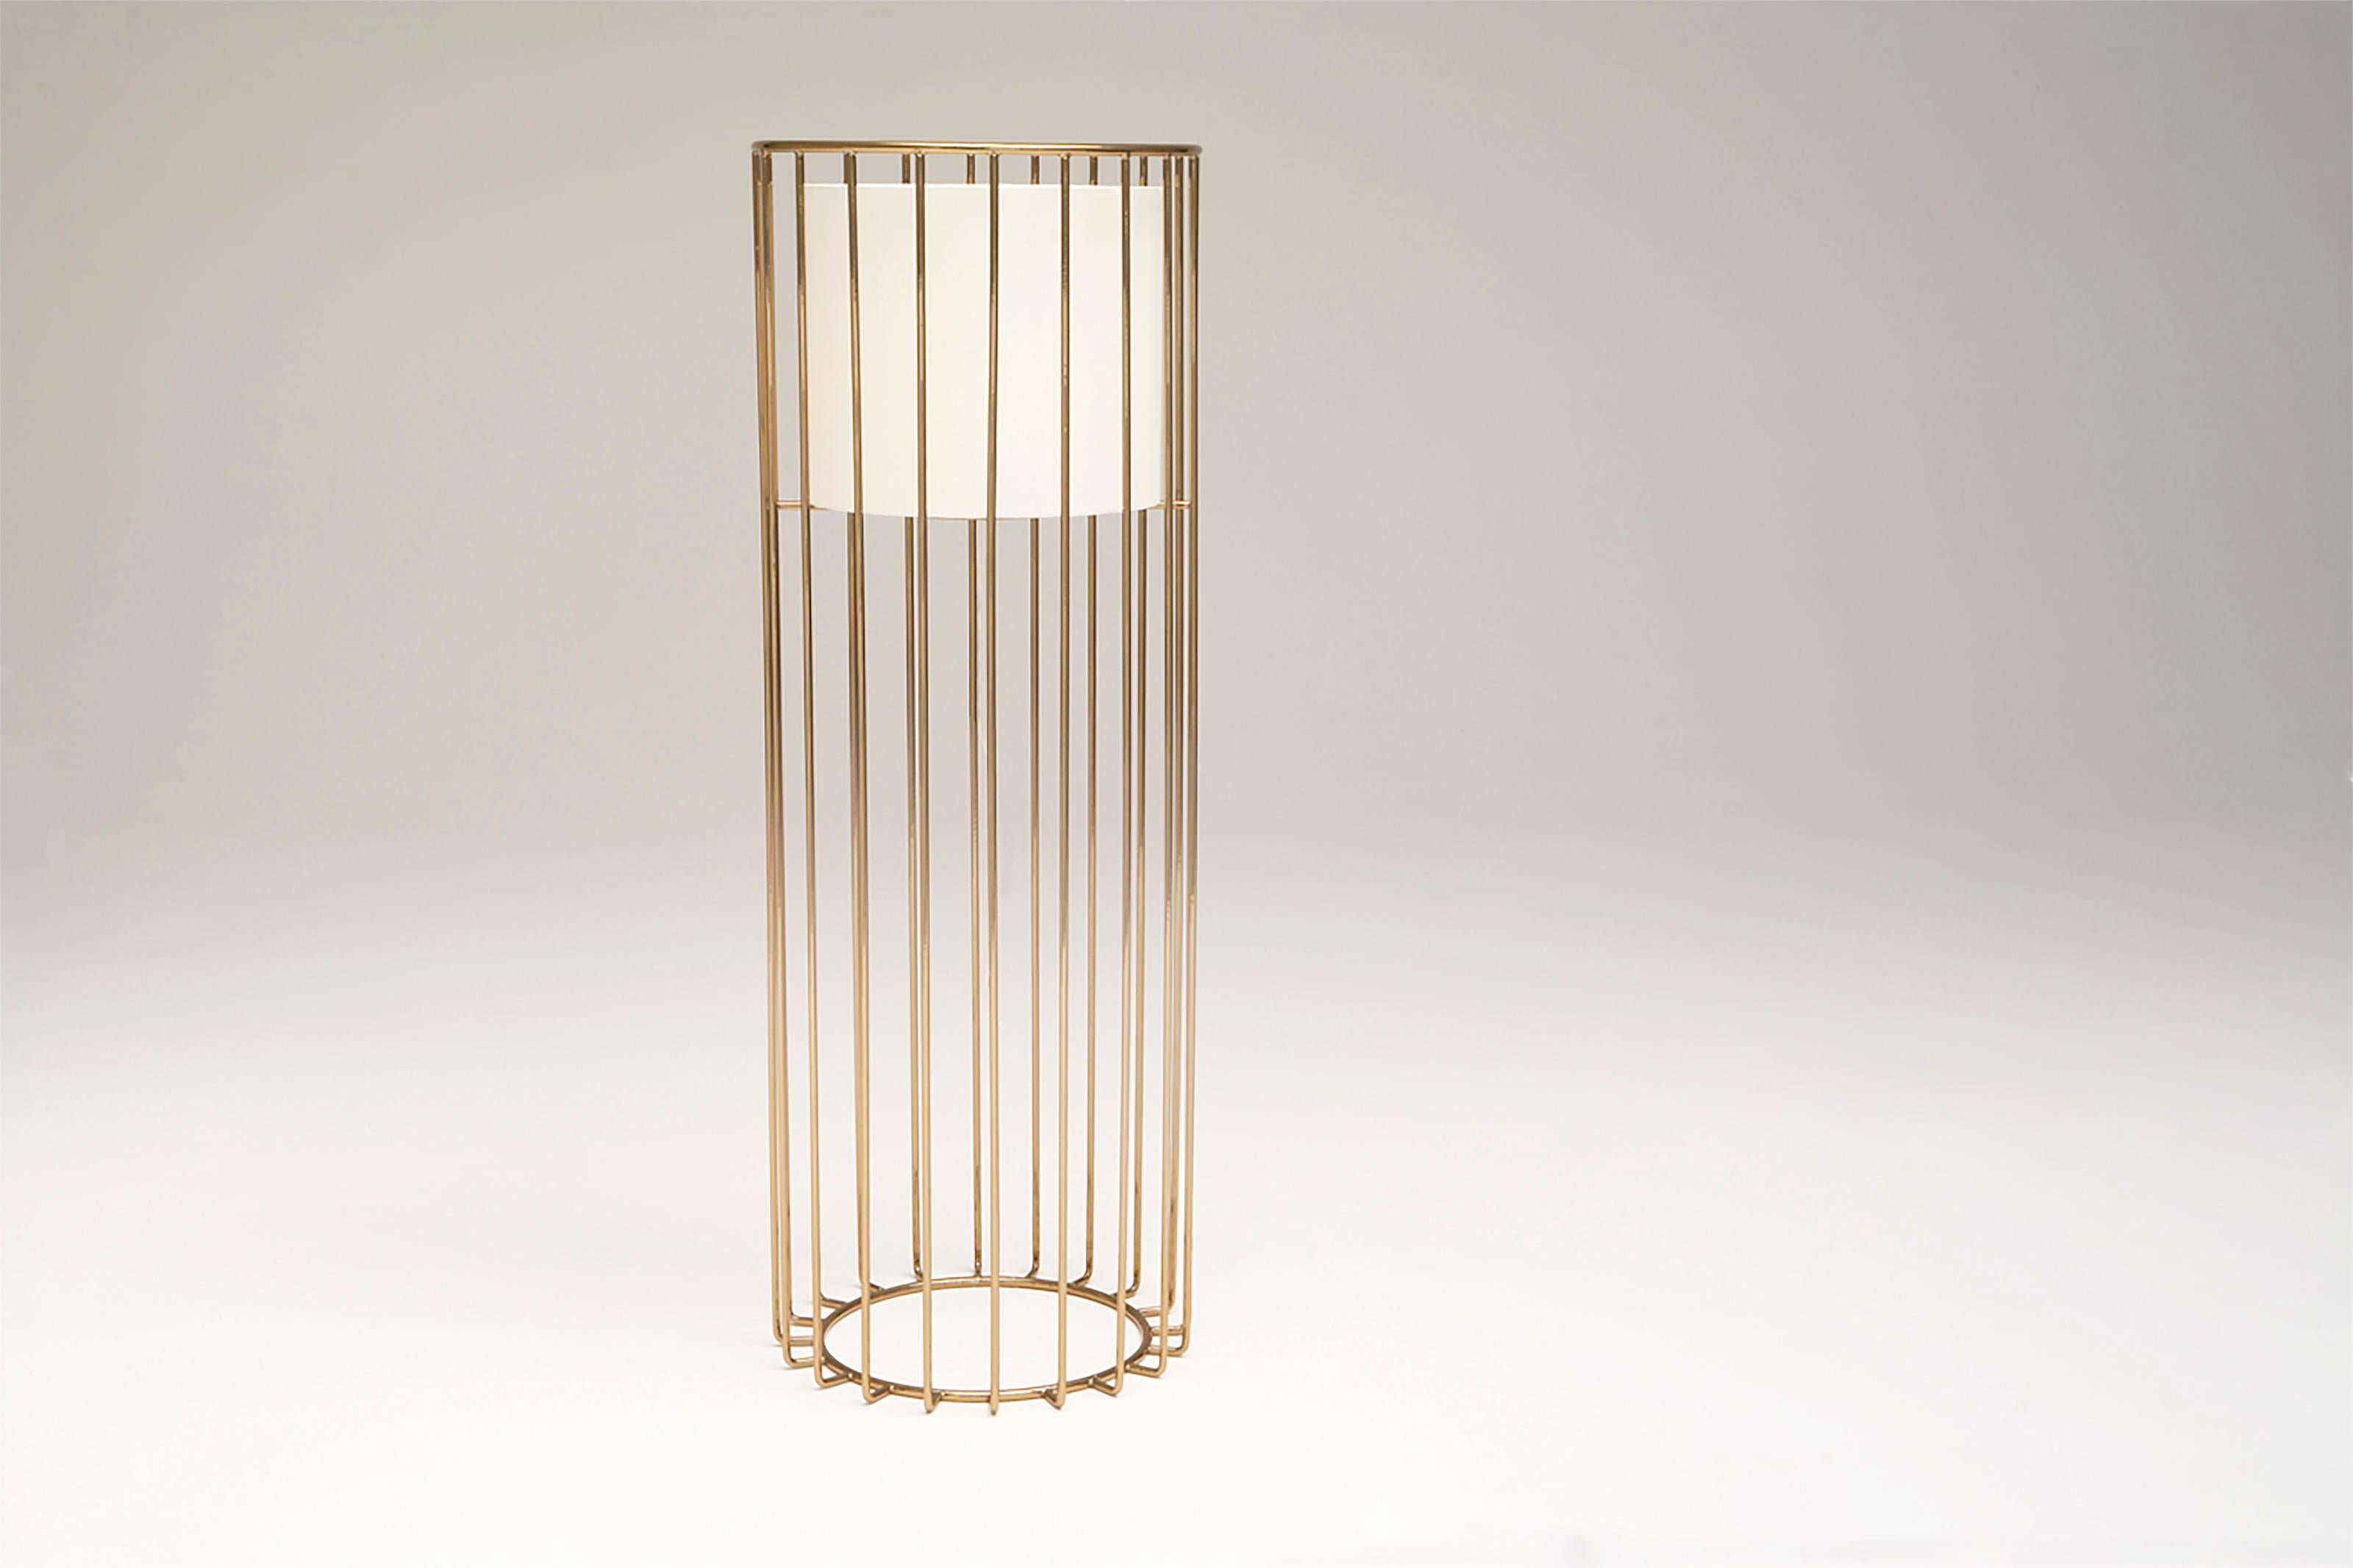 Inner Beauty Floor Light by Phase Design
Dimensions: Ø 50.8 x H 142.2 cm. 
Materials: Linen and smoked brass.

Solid steel bar available in a smoked brass, polished chrome, burnt copper, gloss or flat black and white powder coat. Powder coat